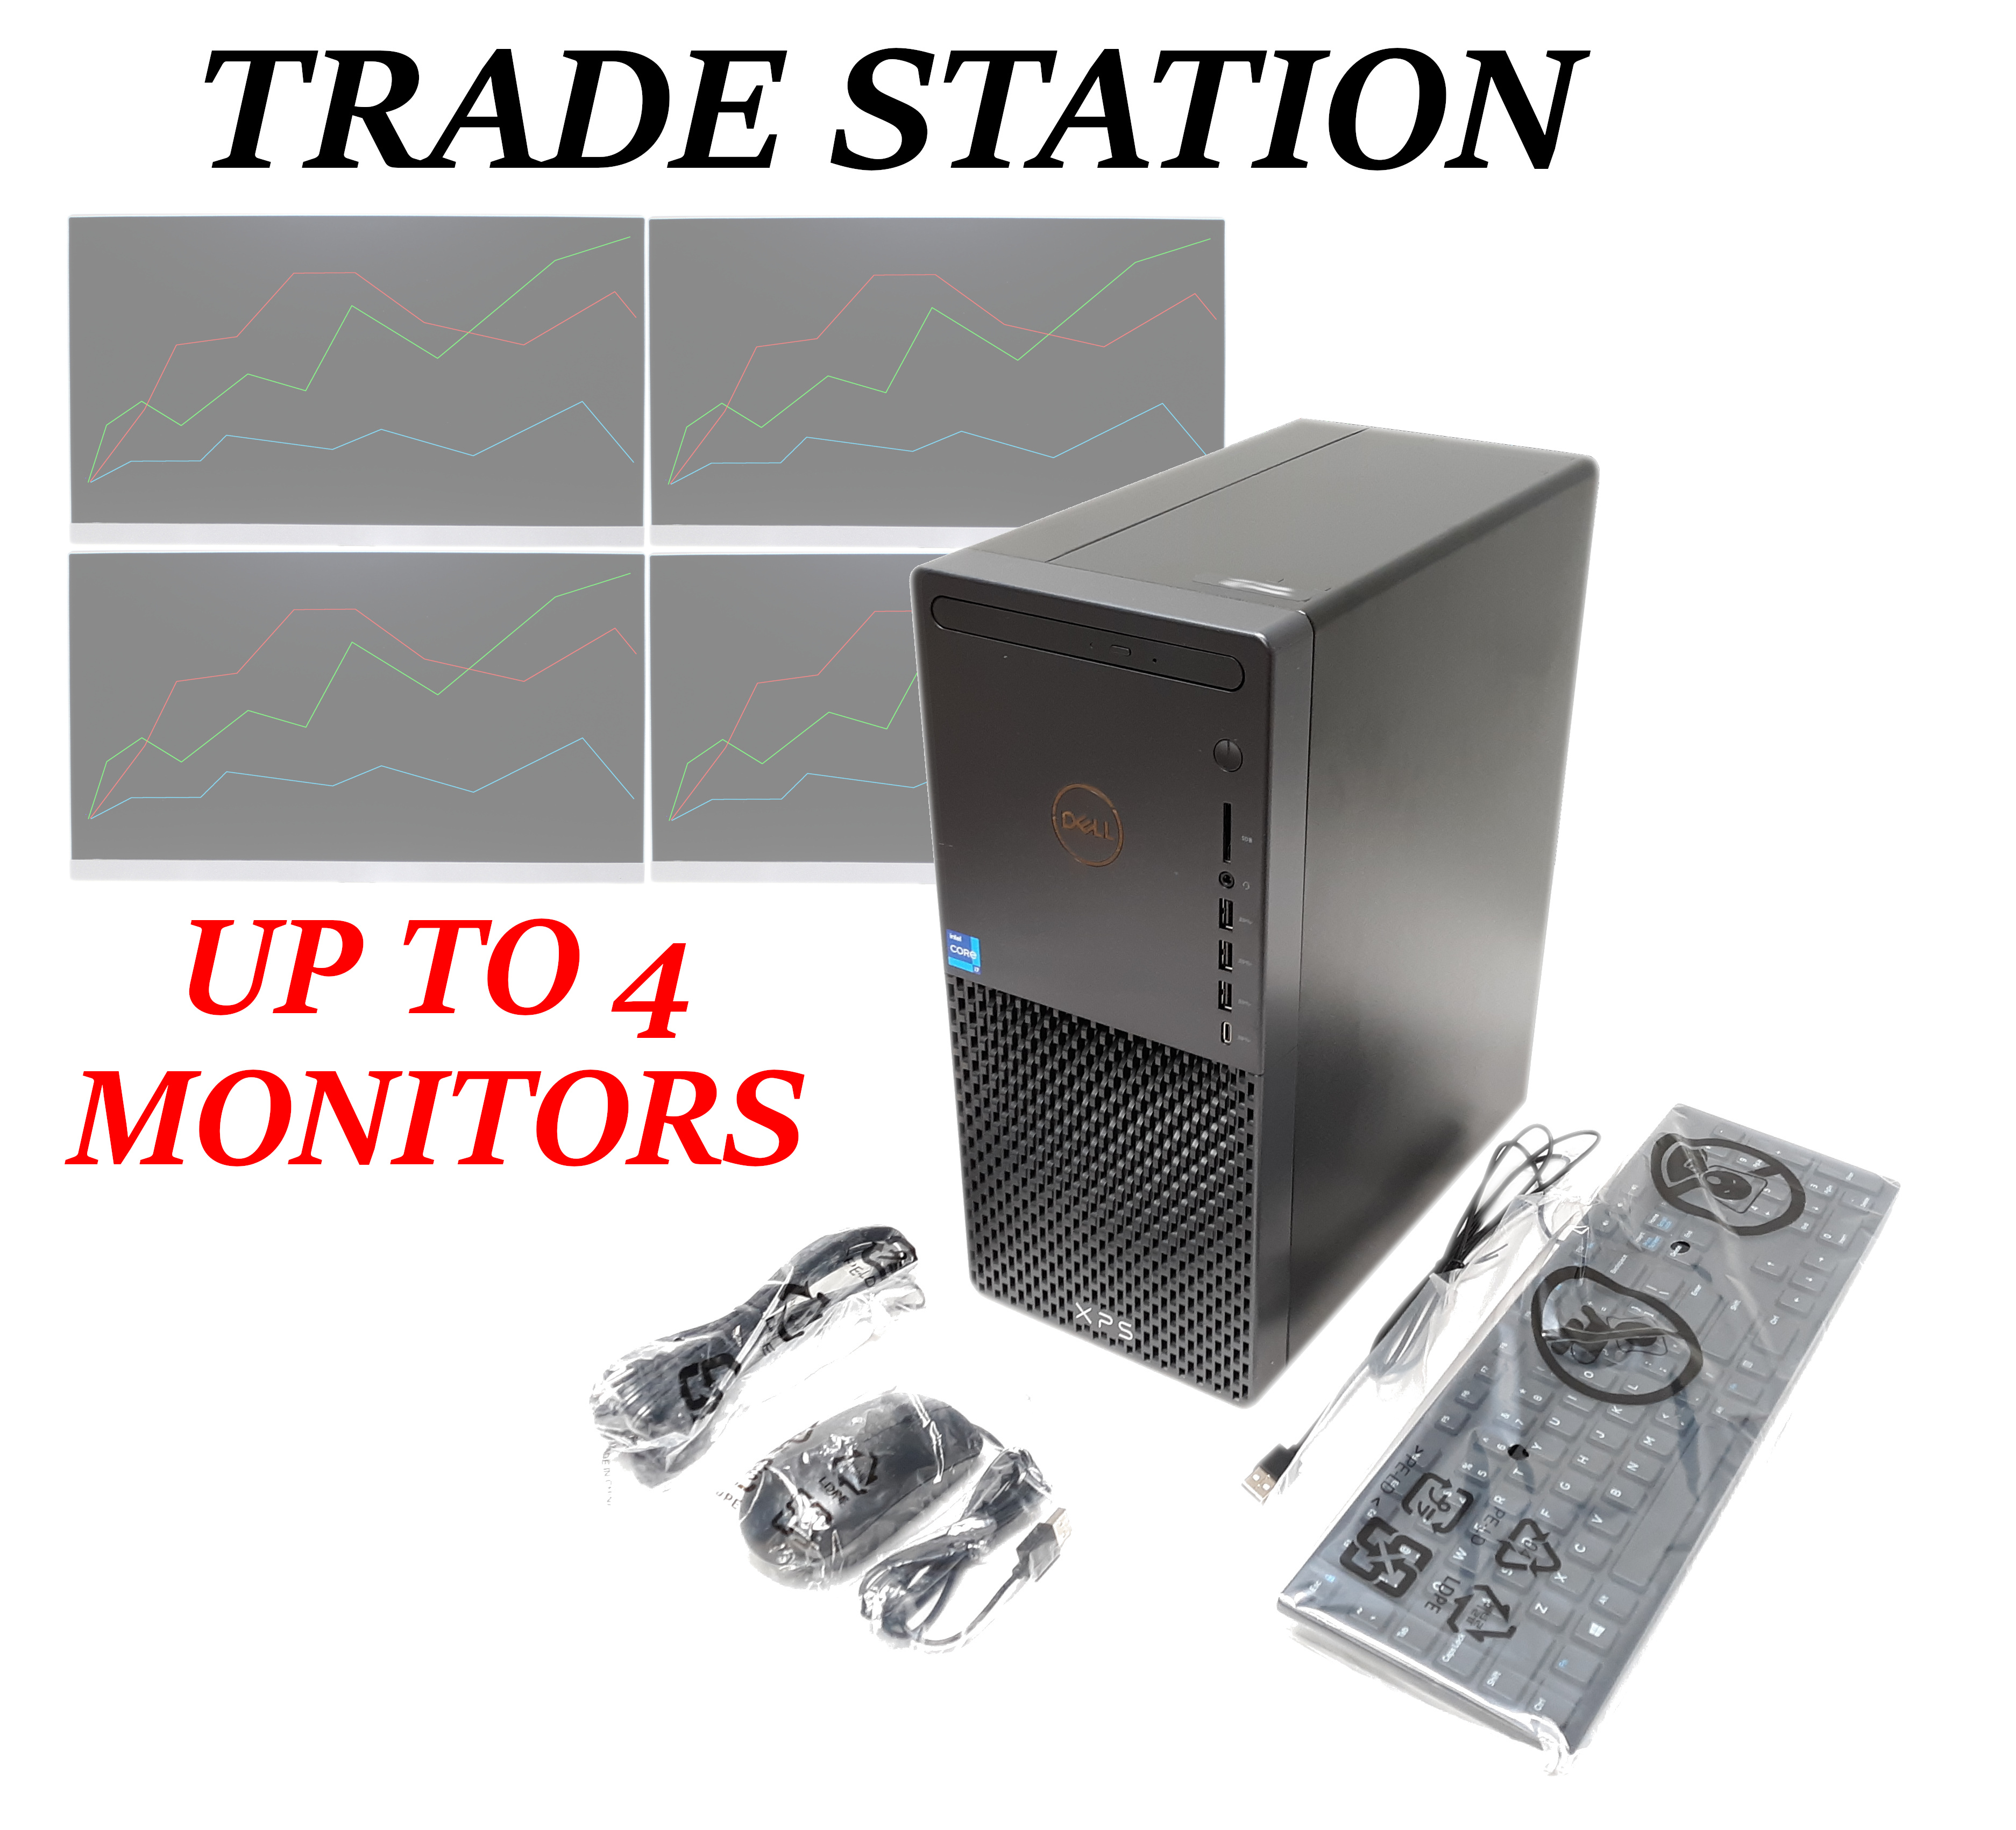 Dell XPS 8940 Trade Station up to 4 Monitors i7-11700 8C/16T SSD M.2 512GB HDD 1TB RAM 32GB Wi-Fi - Click Image to Close